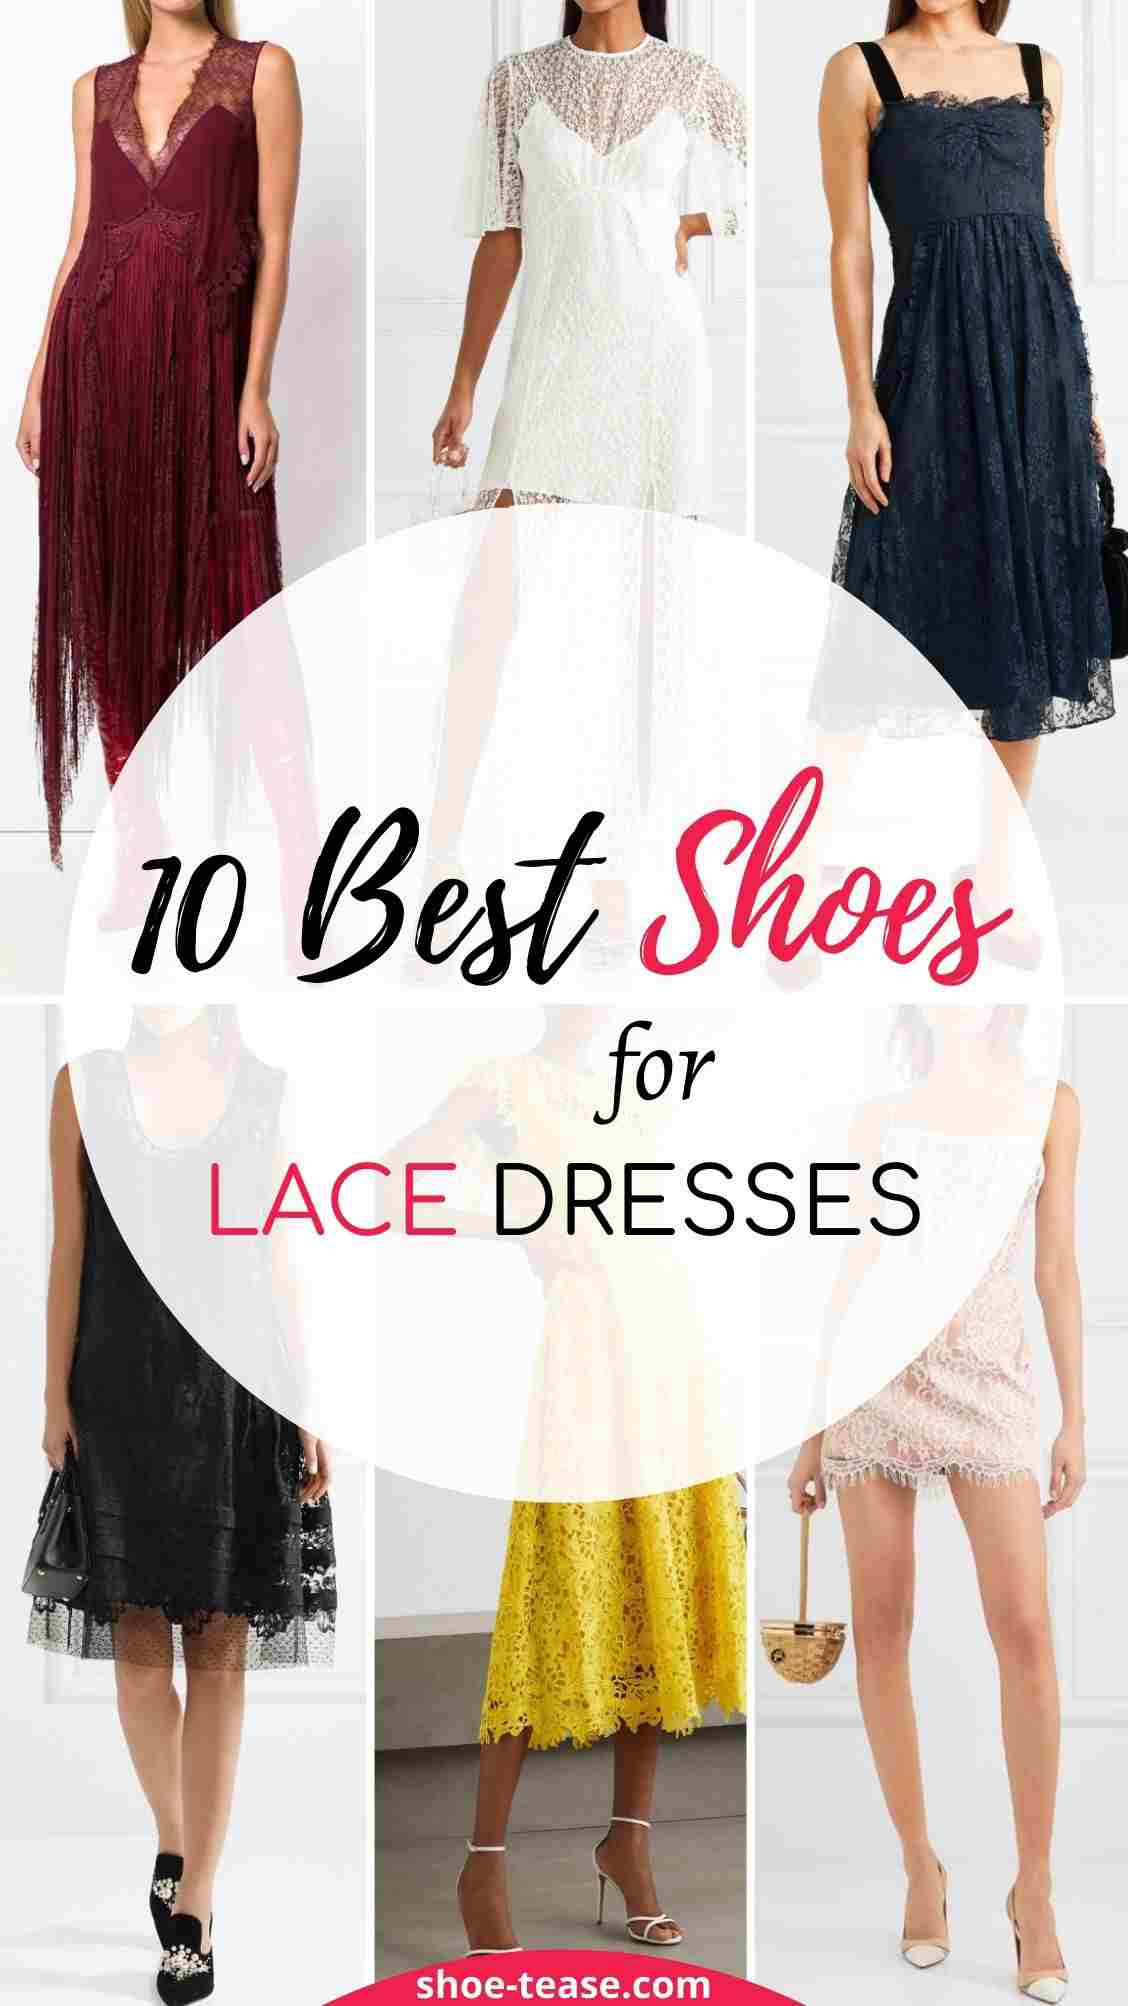 Shoes to Wear with a Lace Dress - All the Styling Tips!